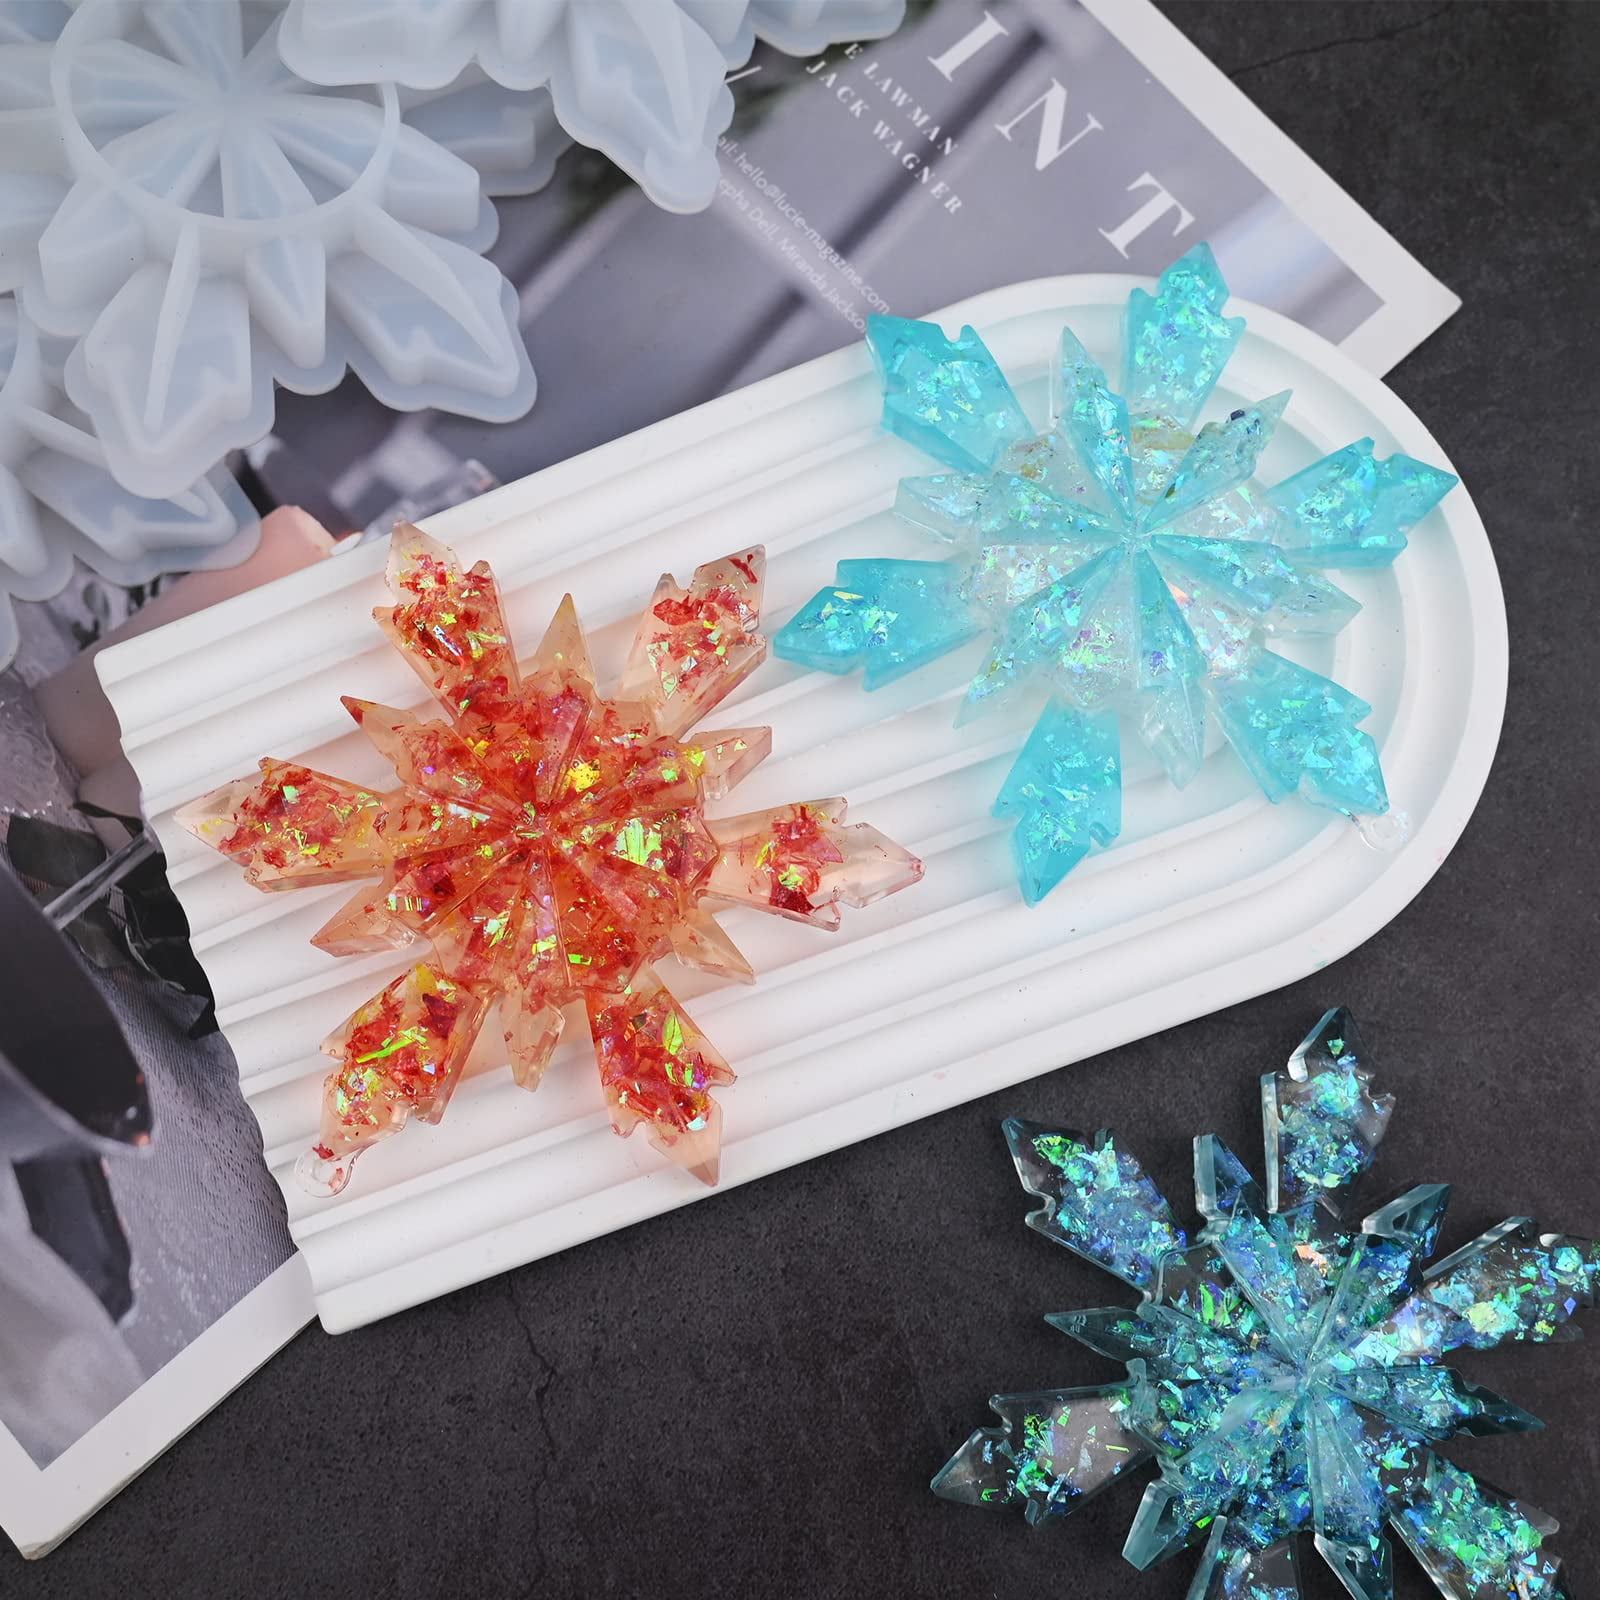  8 Pieces Snowflake Resin Molds Snowflake Silicone Molds Resin  Snowflake Molds DIY Casting Pendant Mold Snowflake Epoxy Molds for Xmas  Ornament DIY Crafts Decors : Arts, Crafts & Sewing